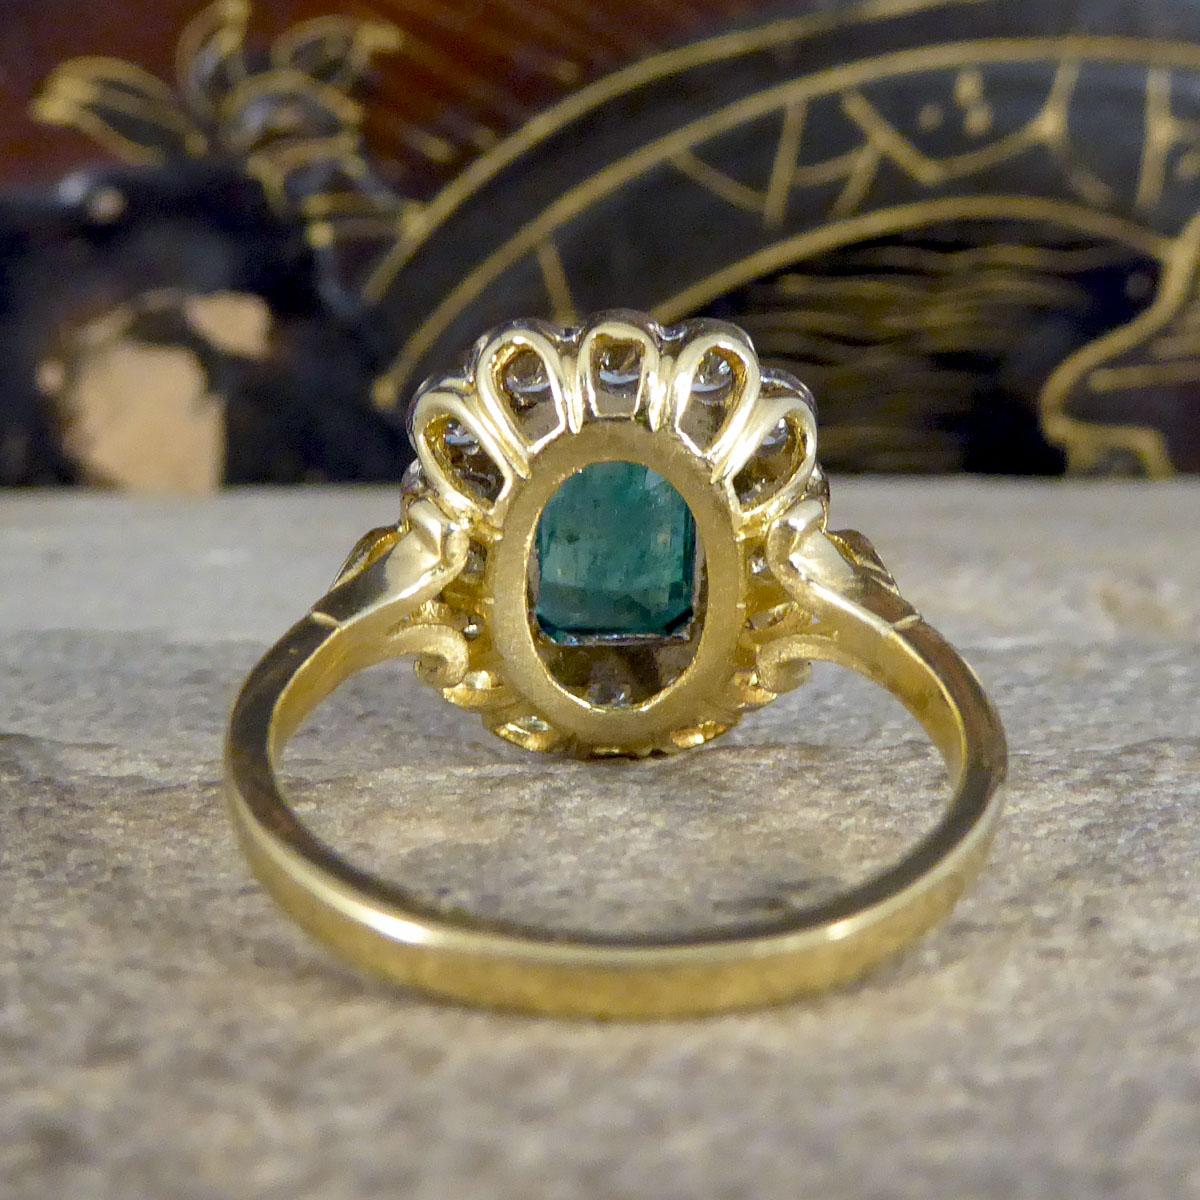 Edwardian Vintage 1.25ct Emerald and 0.50ct Diamond Cluster Ring in 18ct Yellow and White